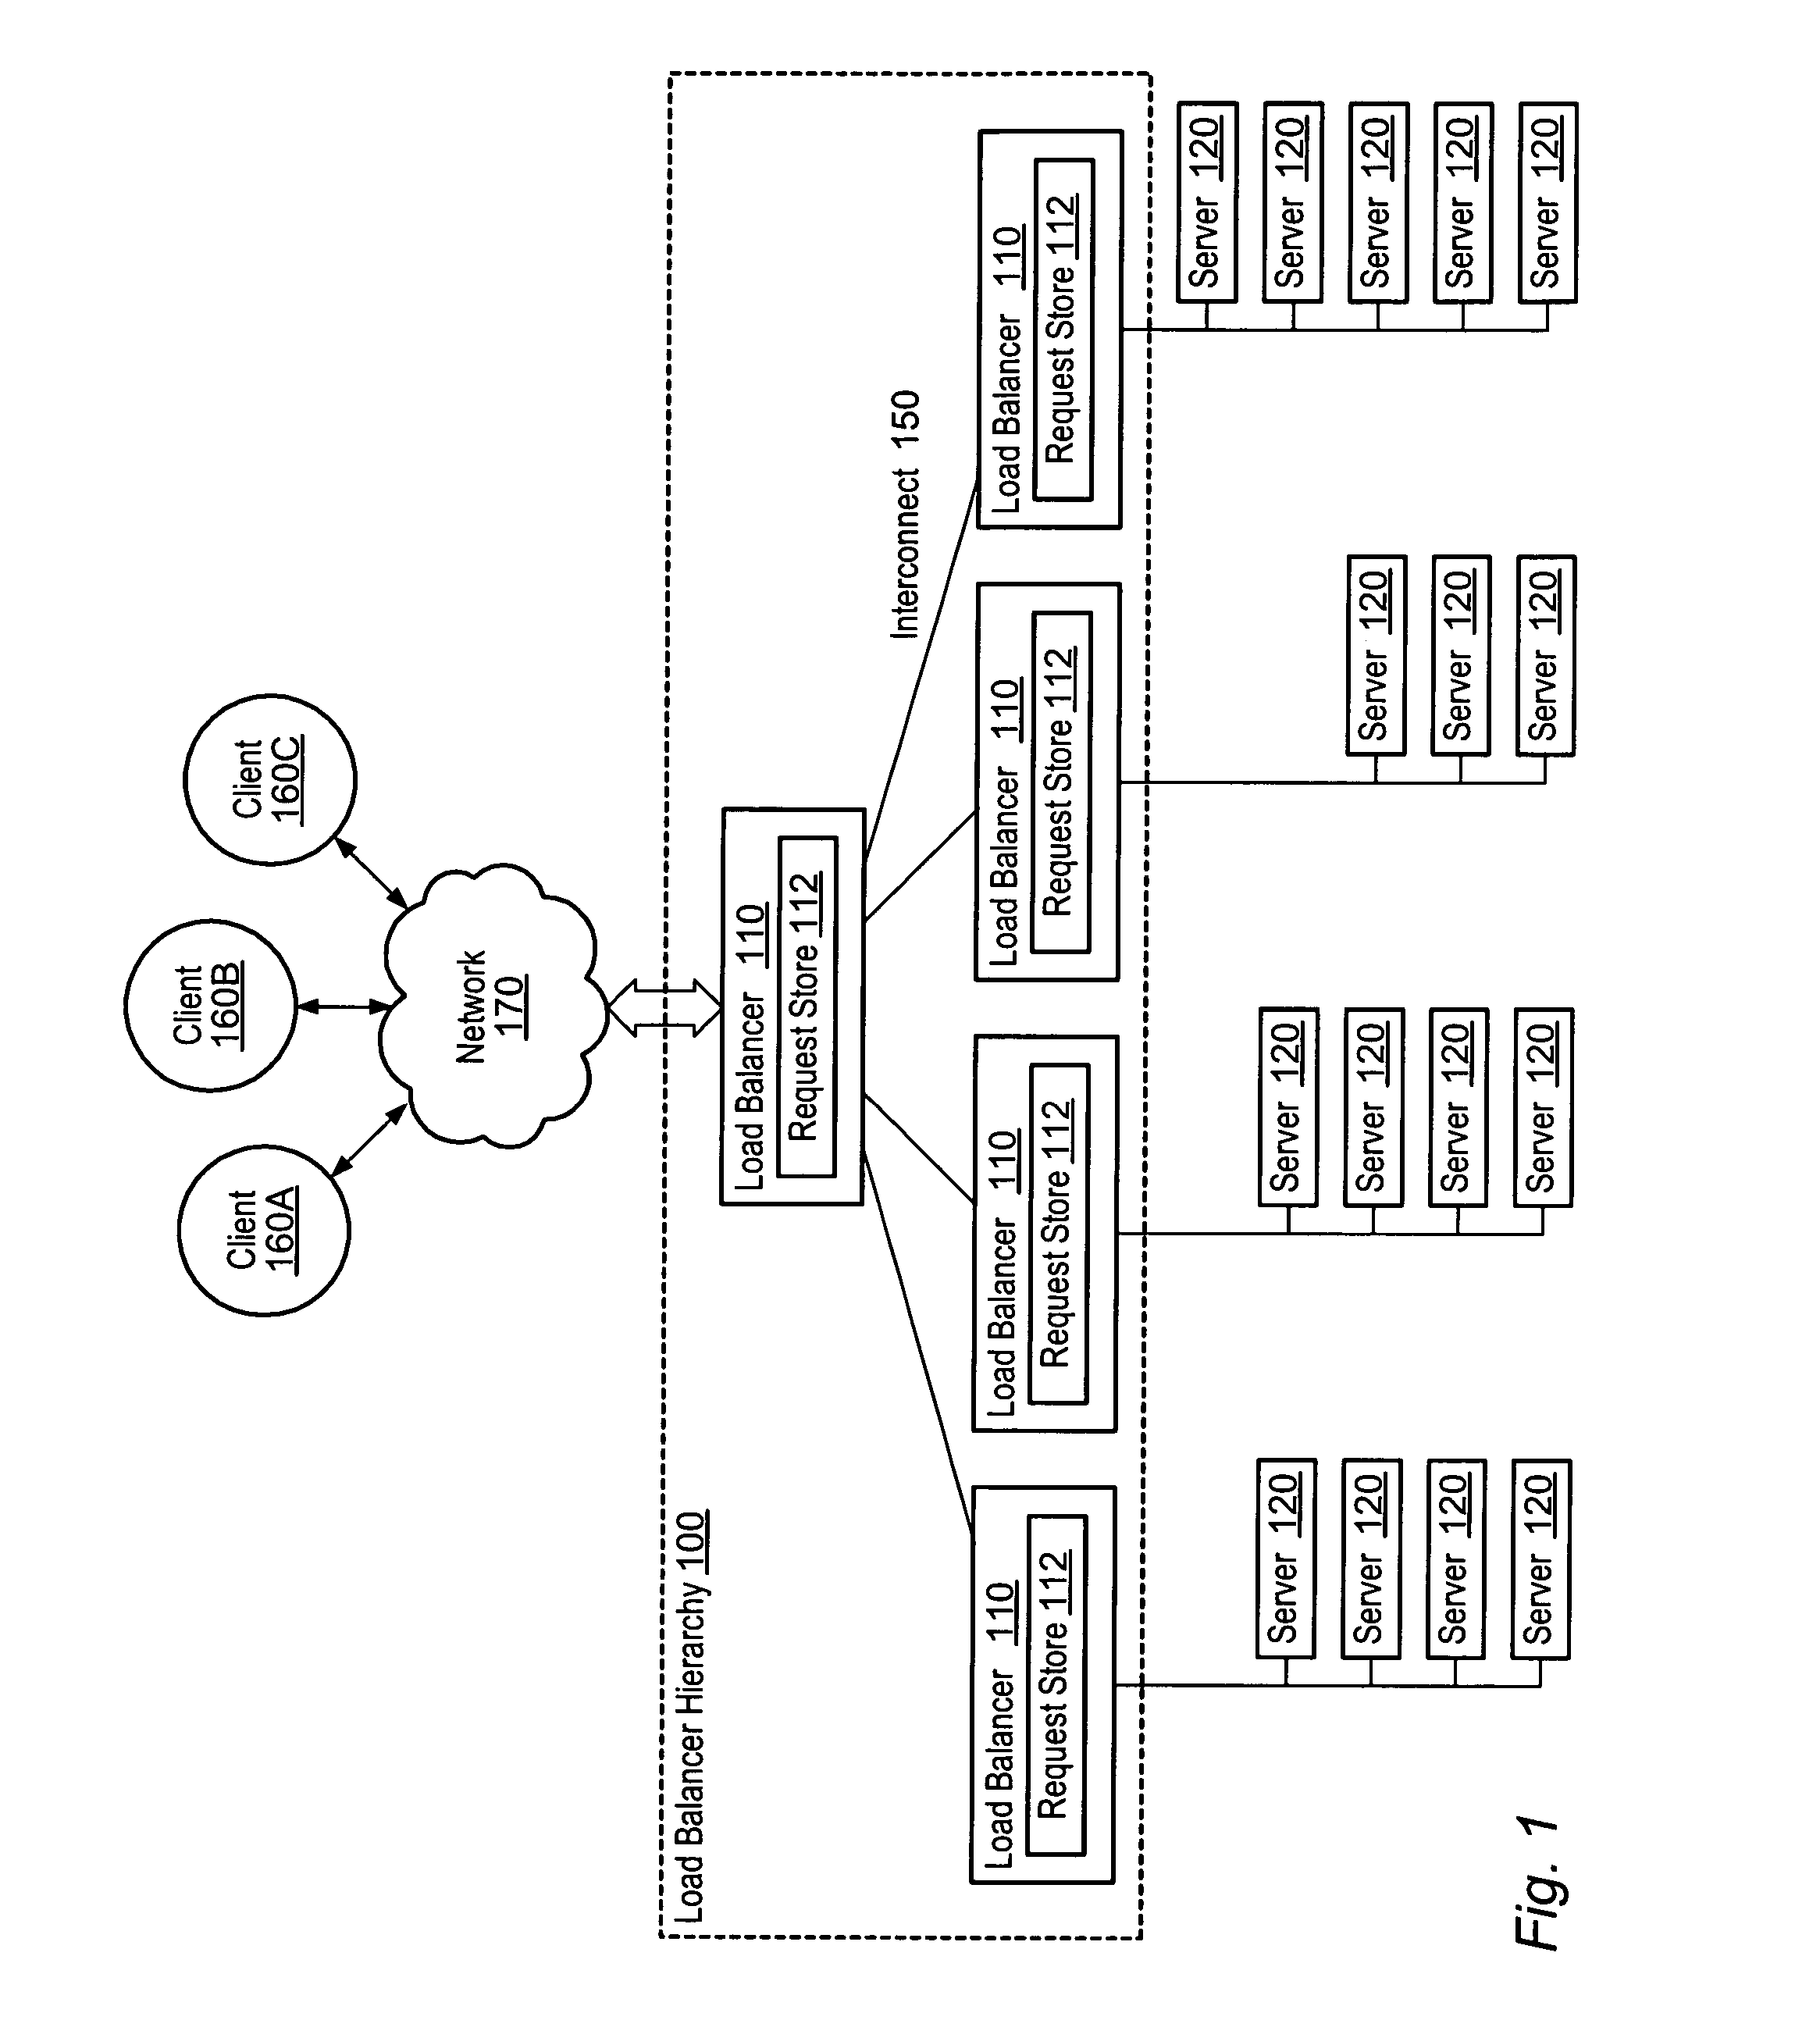 Request failover mechanism for a load balancing system